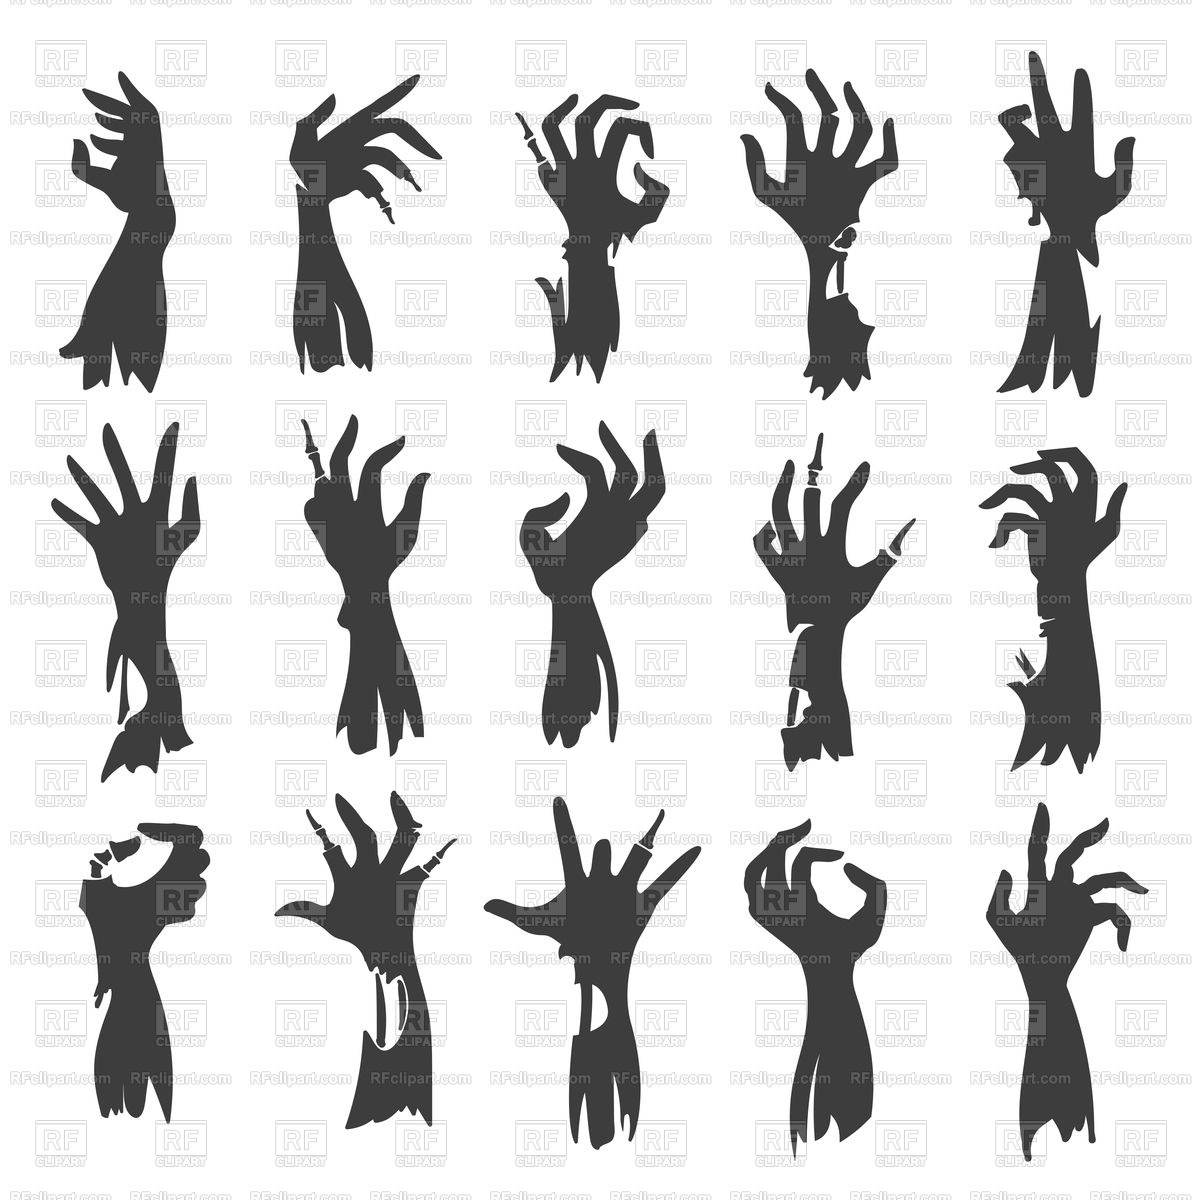 Download Zombie Hand Vector at Vectorified.com | Collection of Zombie Hand Vector free for personal use